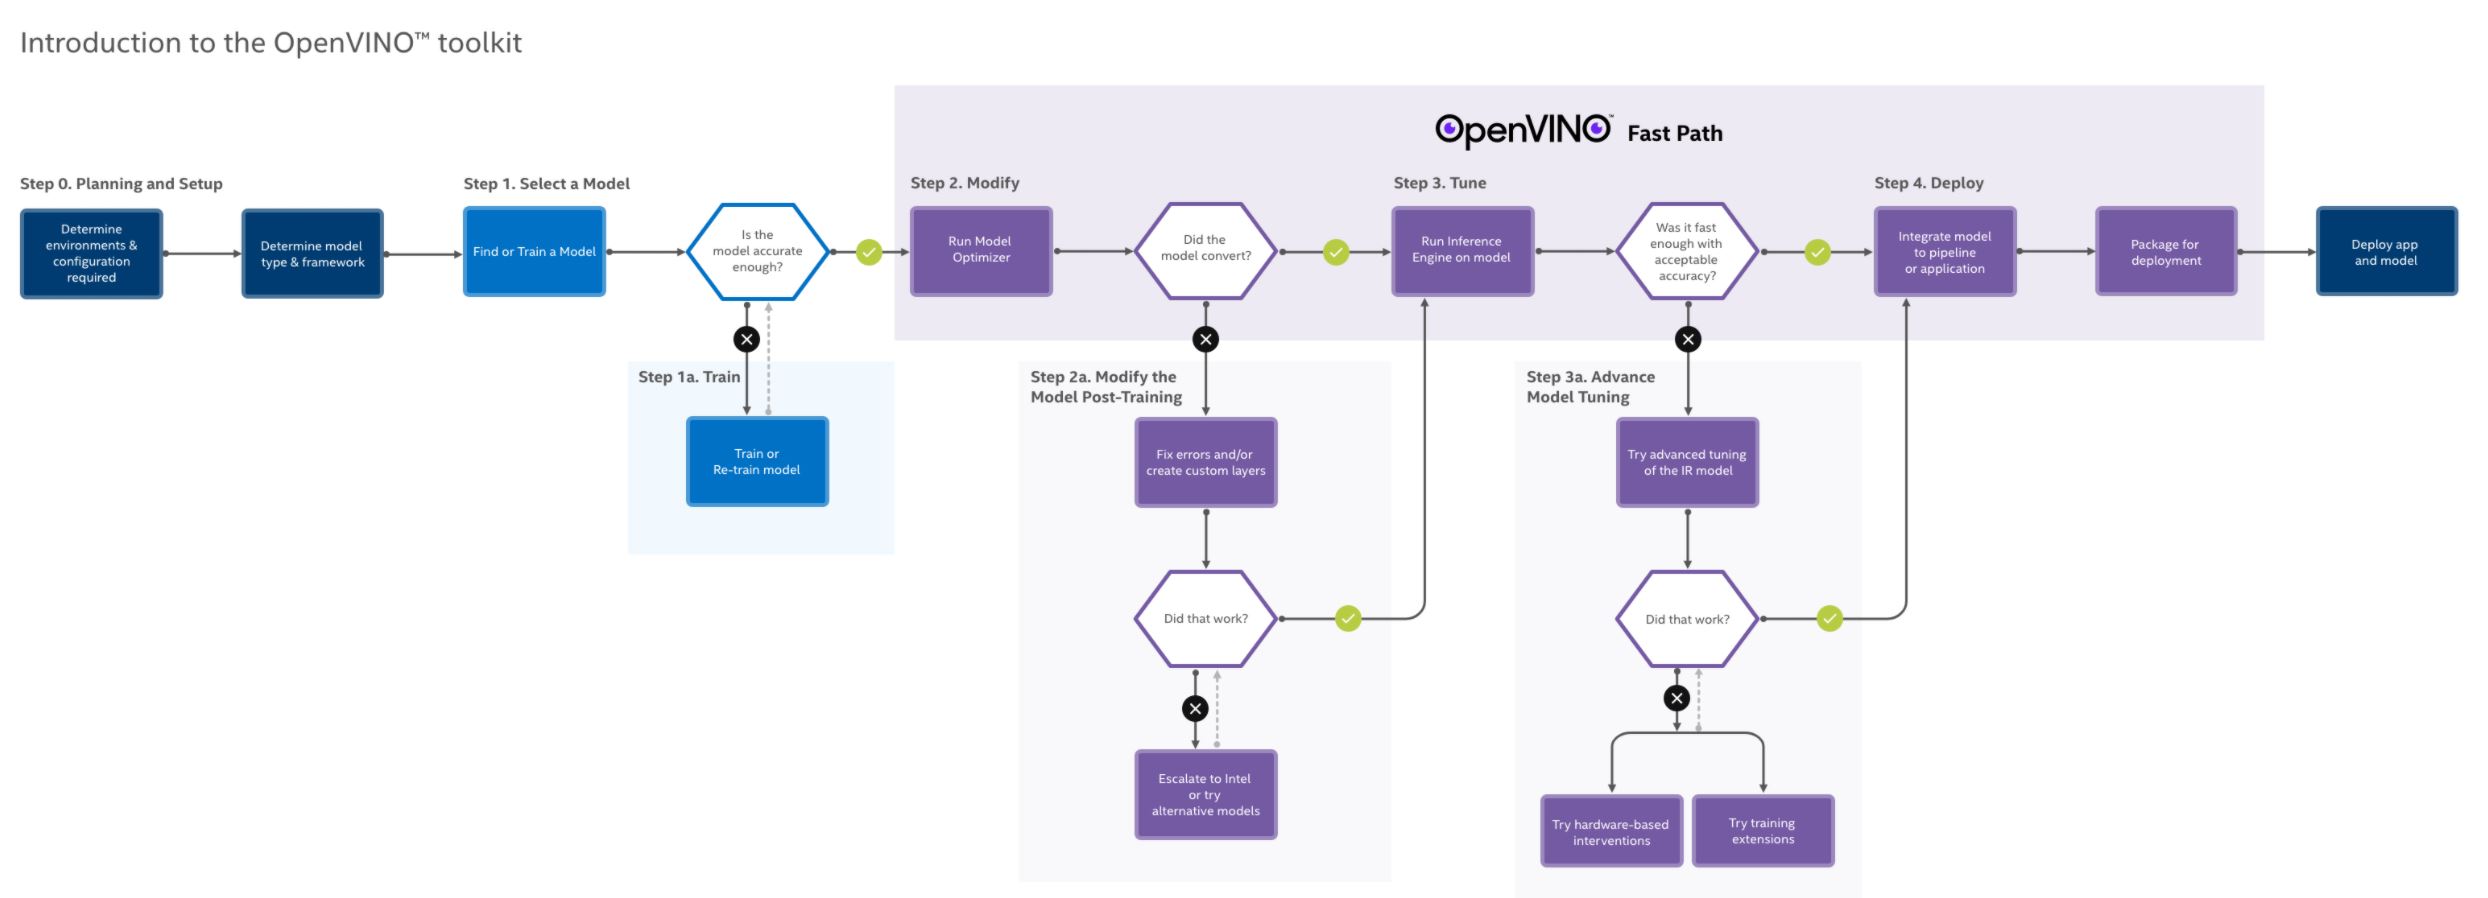 How Intel OpenVNIO Toolkit Workflow